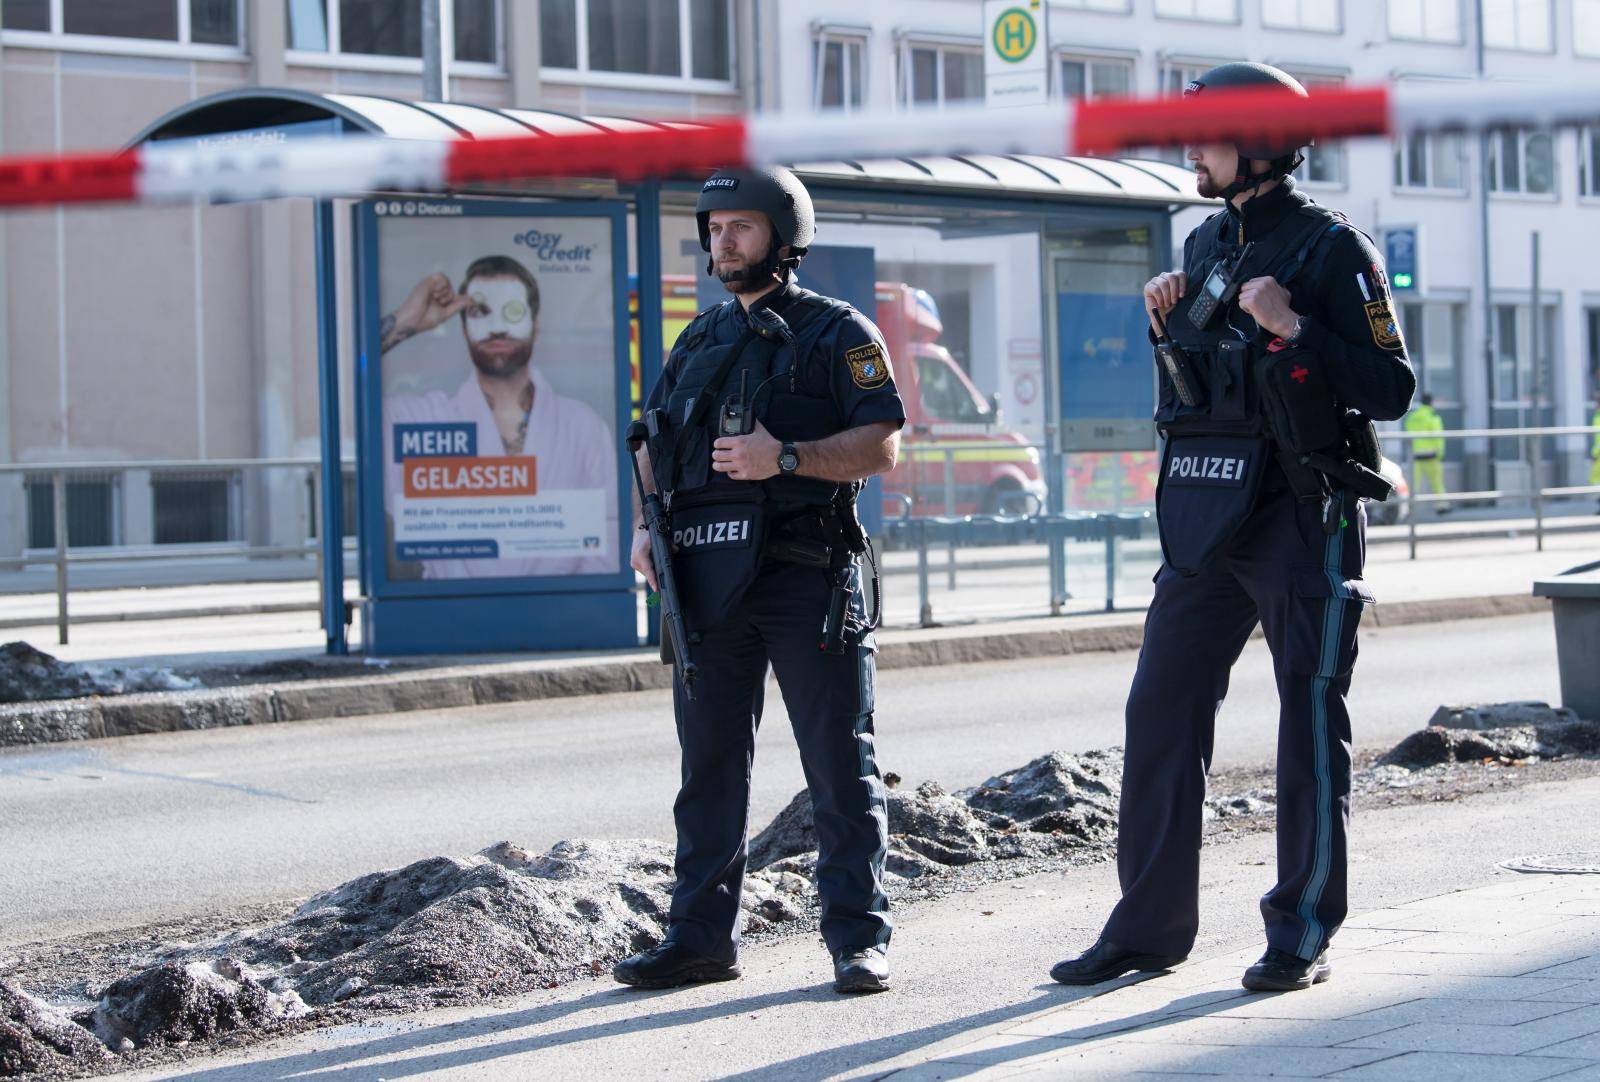 Two dead in shots on construction site in Munich